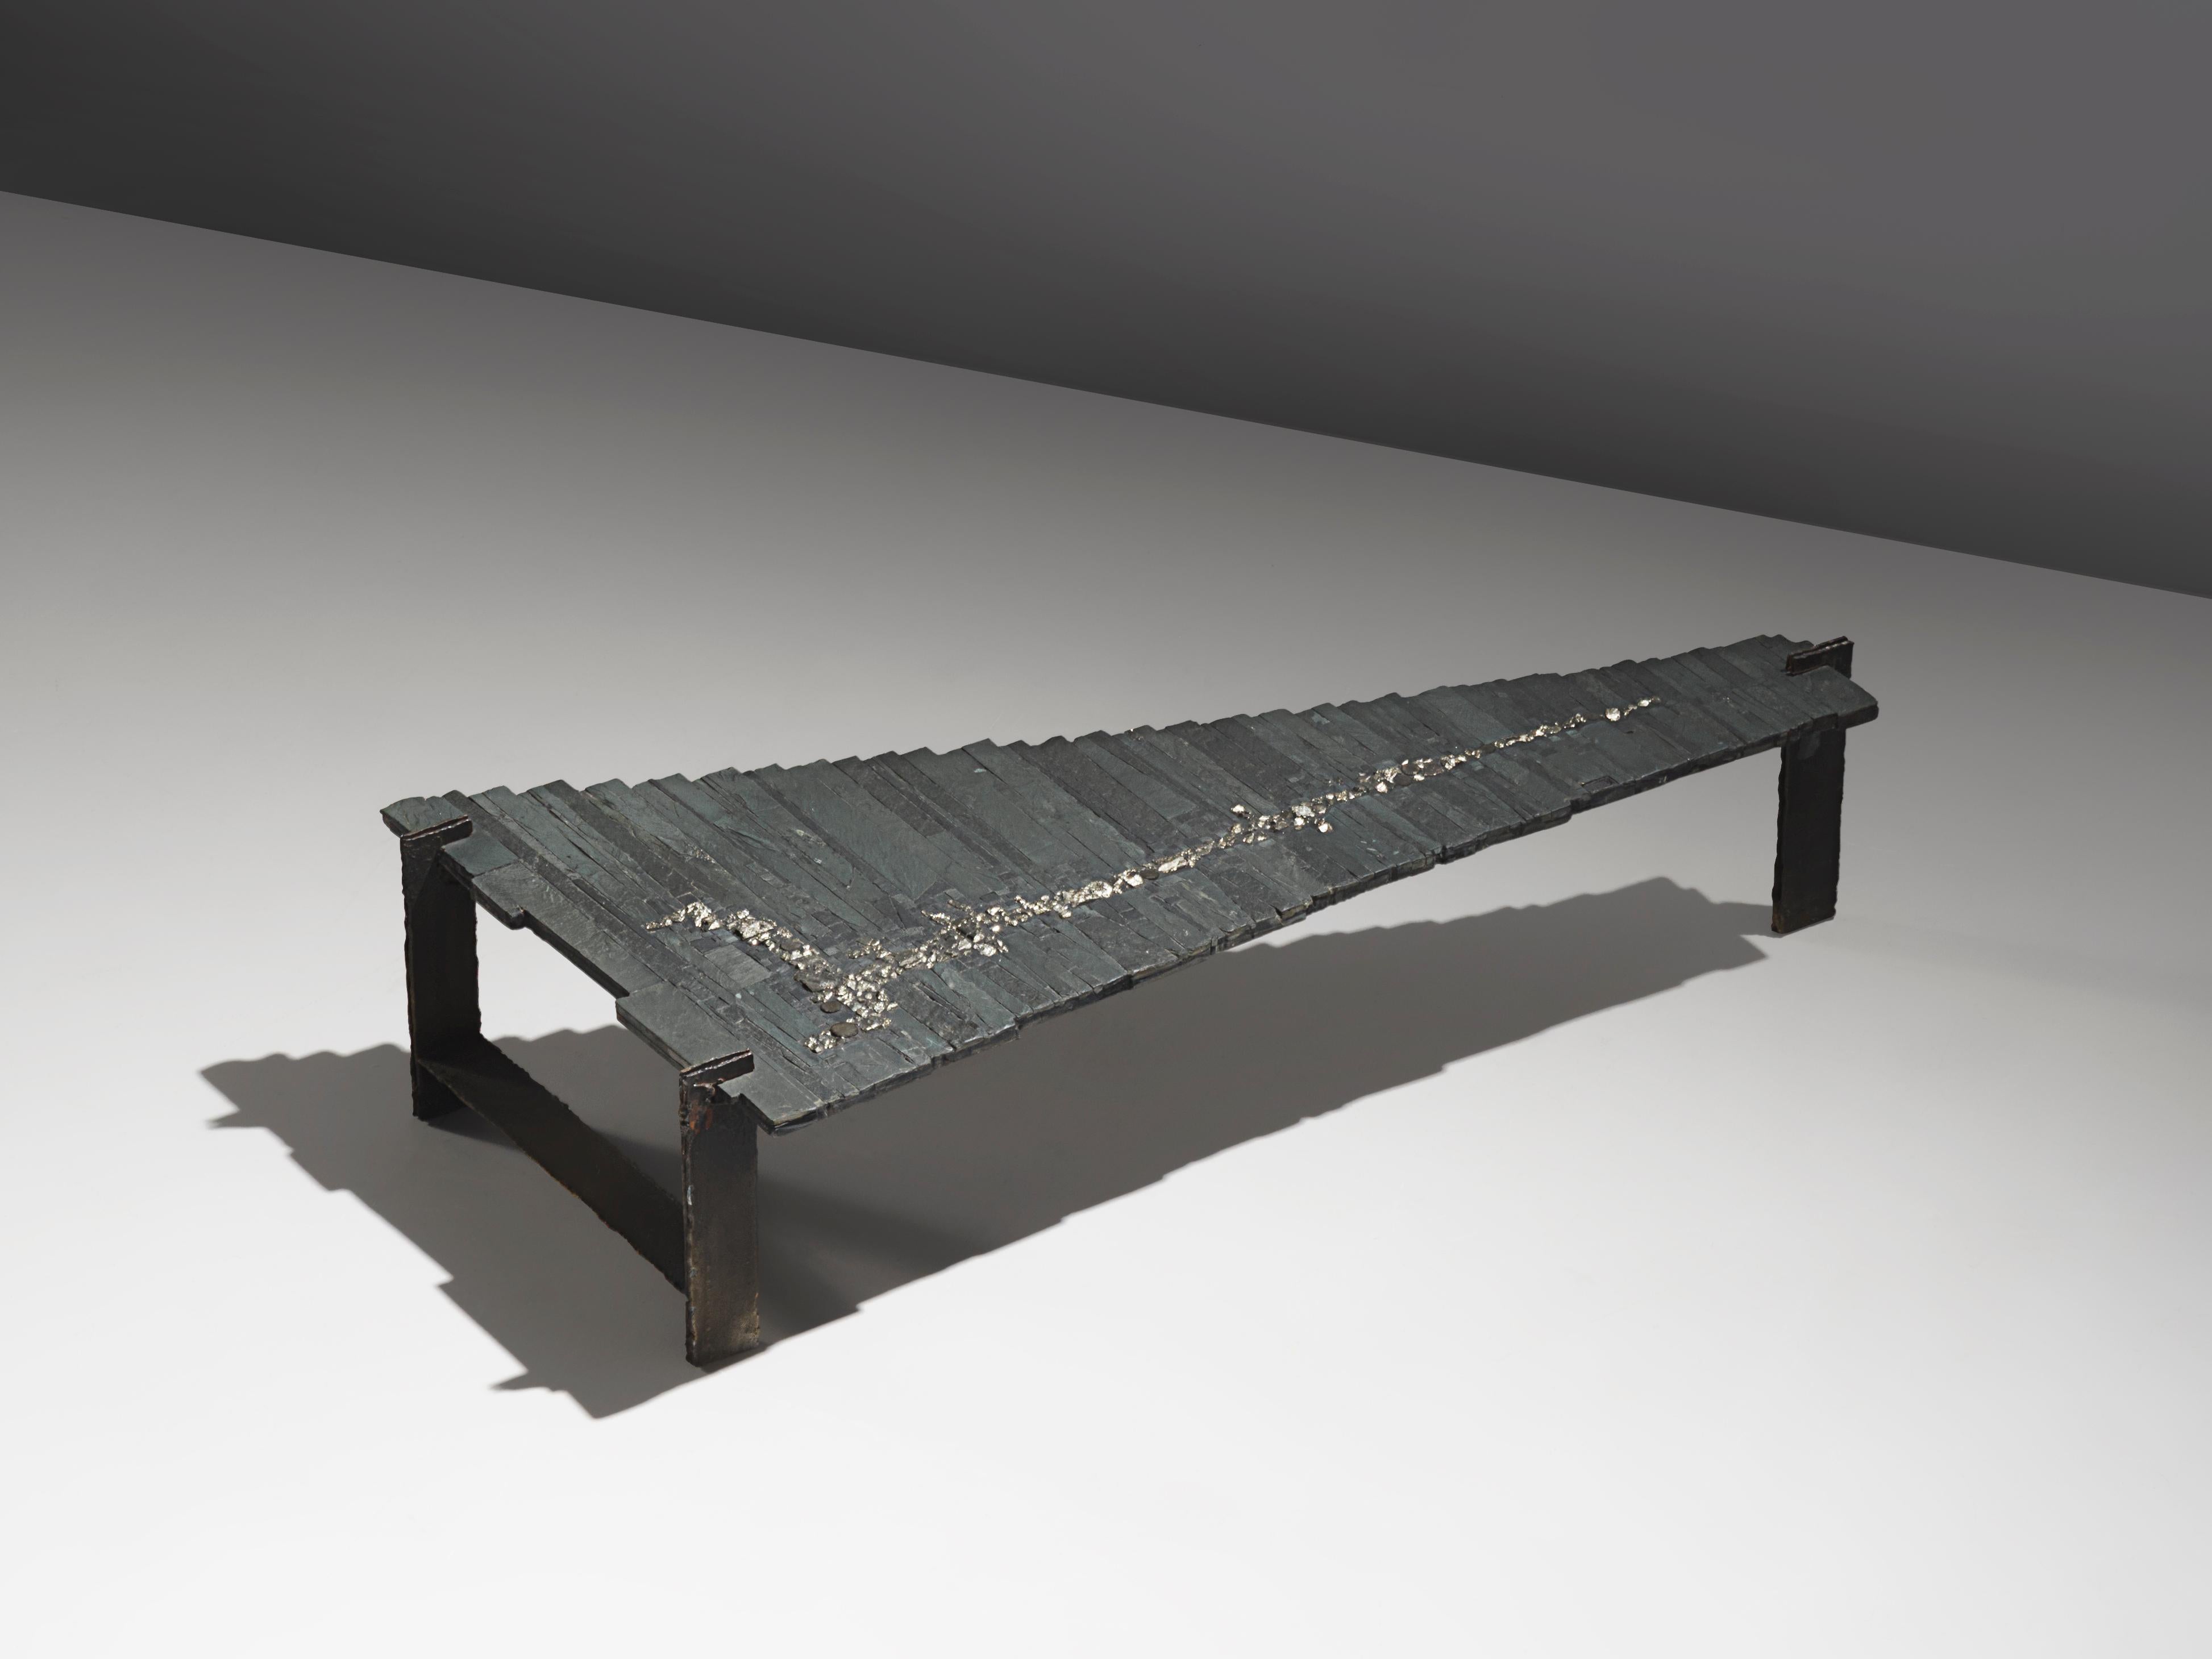 Pia Manu, coffee table, slate, iron and pyrite Belgium, 1970s.

One of a kind brutalist cocktail table by Pia Manu. The table top consists of long pieces of slate in differnet lengths, positioned in a row. The top is inlayed with an abstract